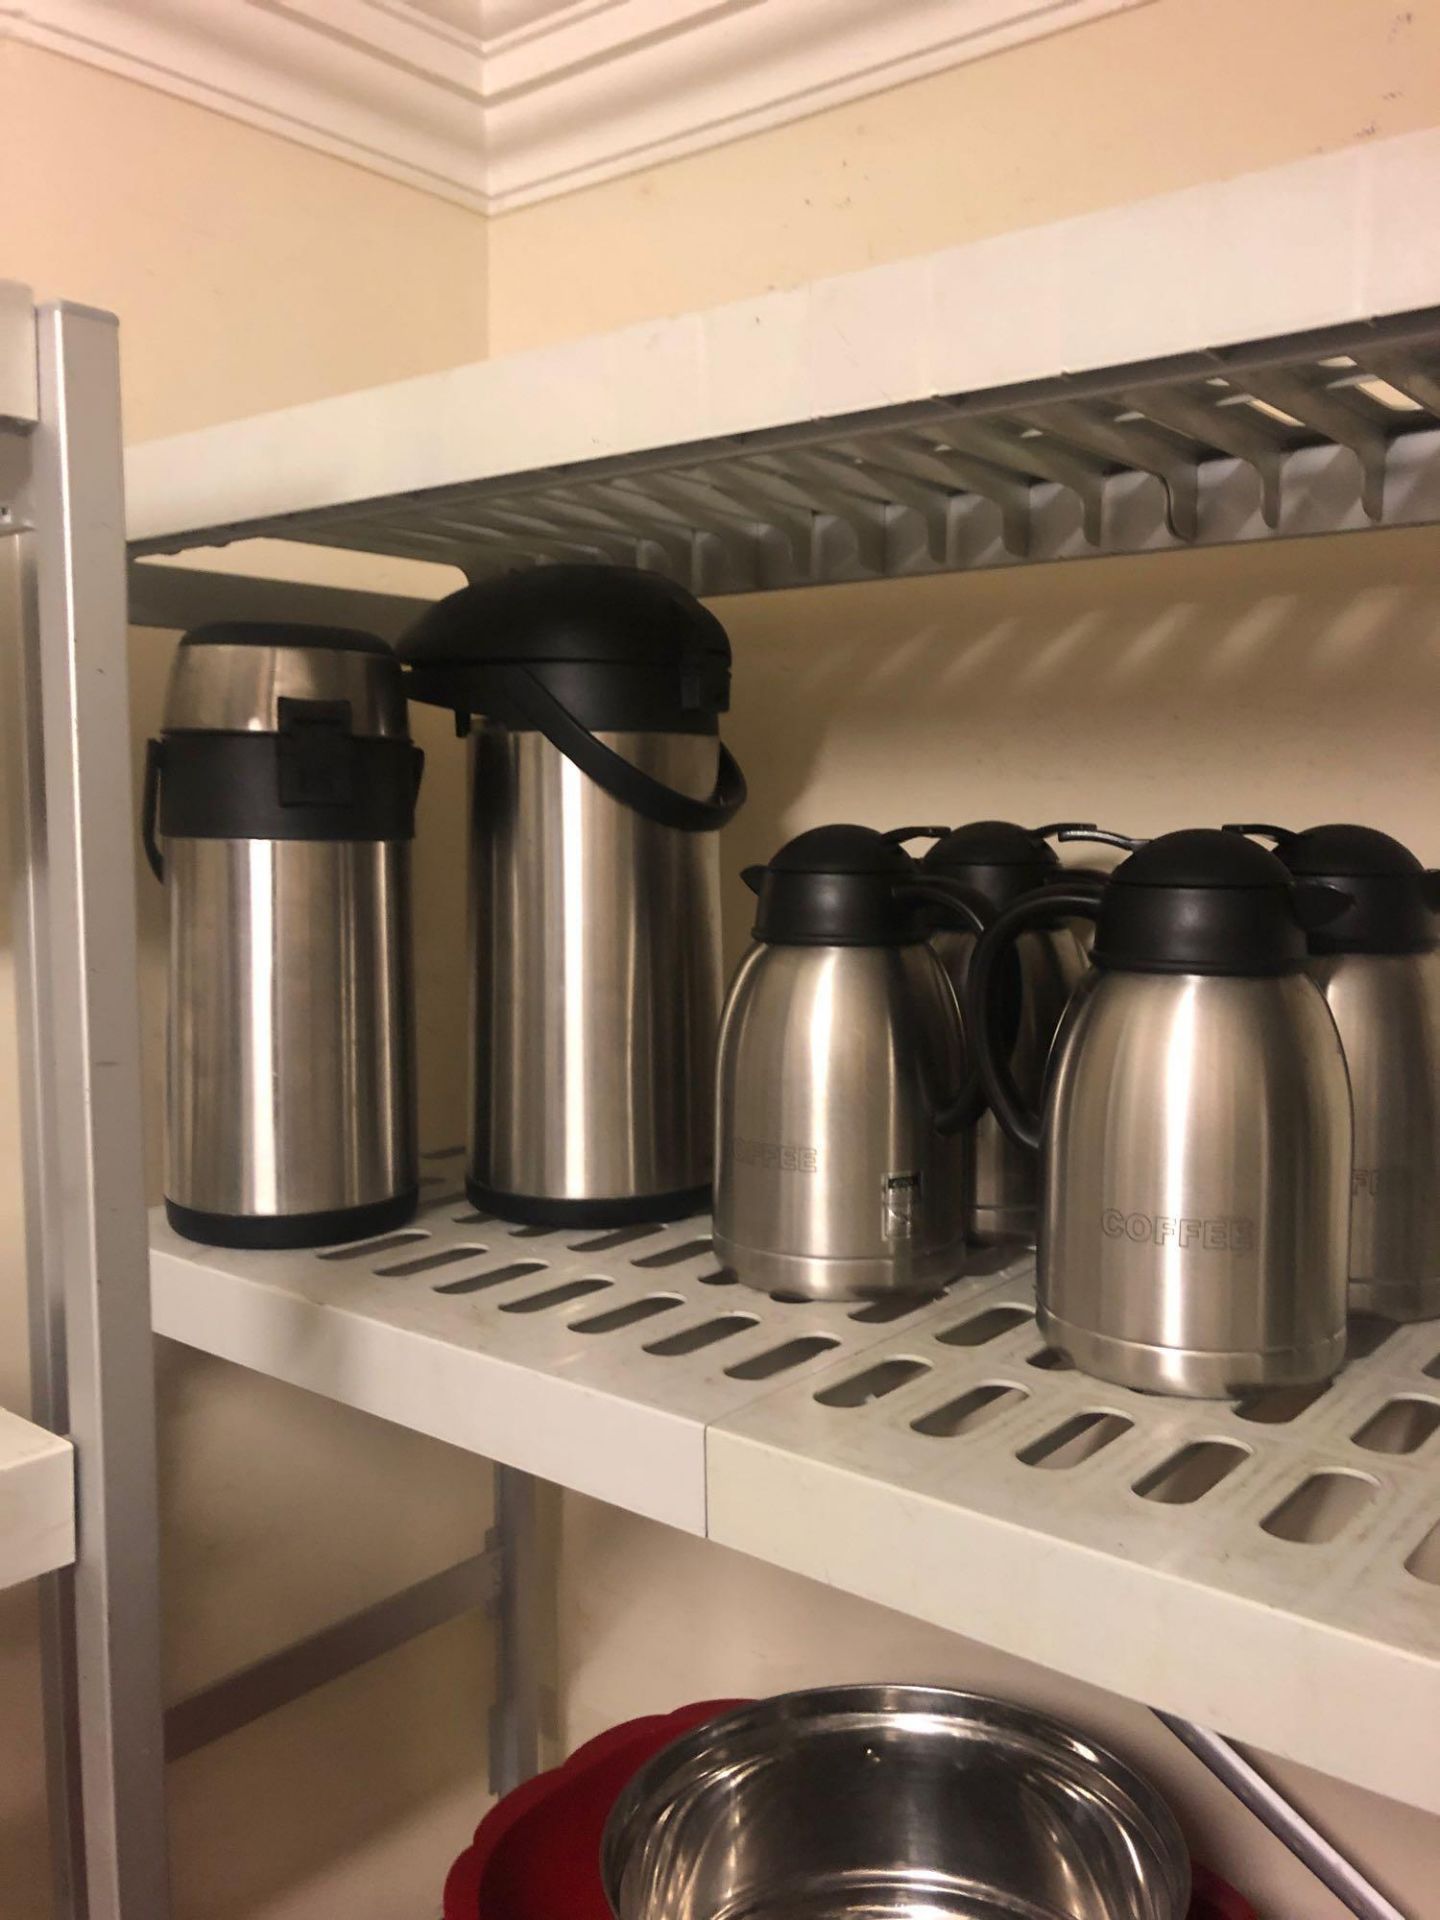 A Large Quantity Of Insulated Hot Water, Milk, Coffee Pots, Vacuum Flasks. - Image 2 of 4